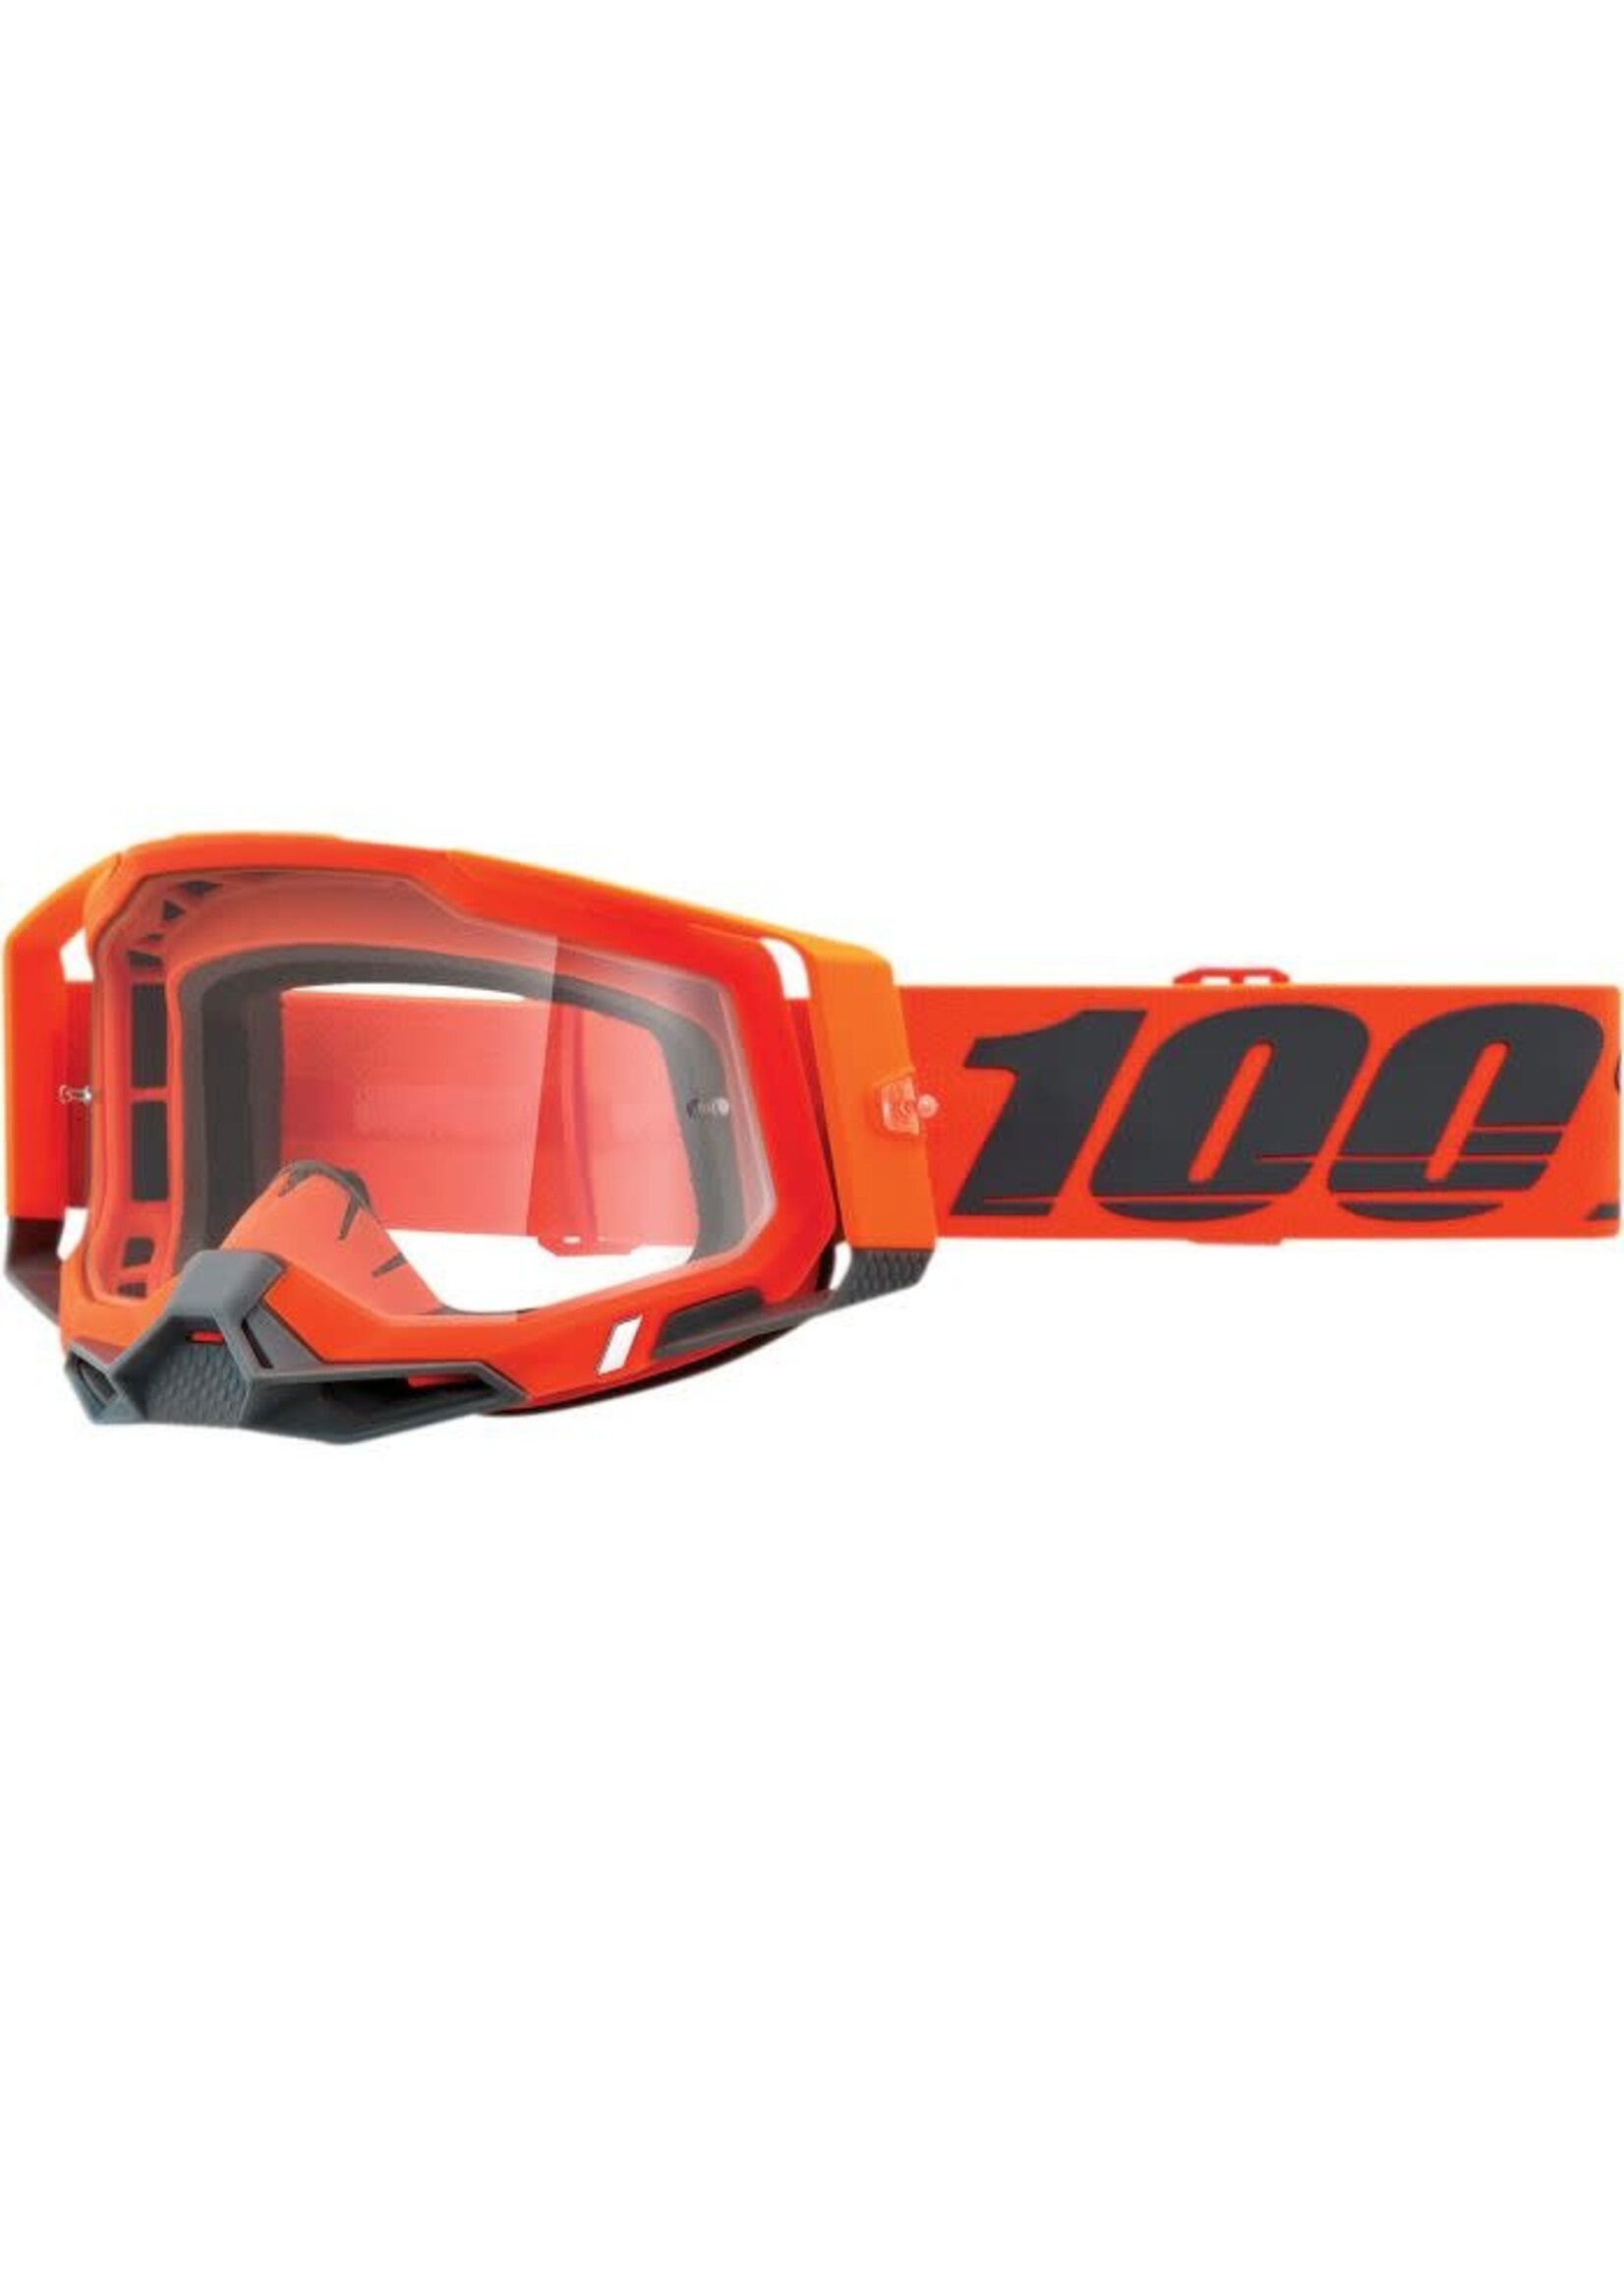 100% RACECRAFT 2 GOGGLE KERV - CLEAR LENS  ( shown with mirror lens)